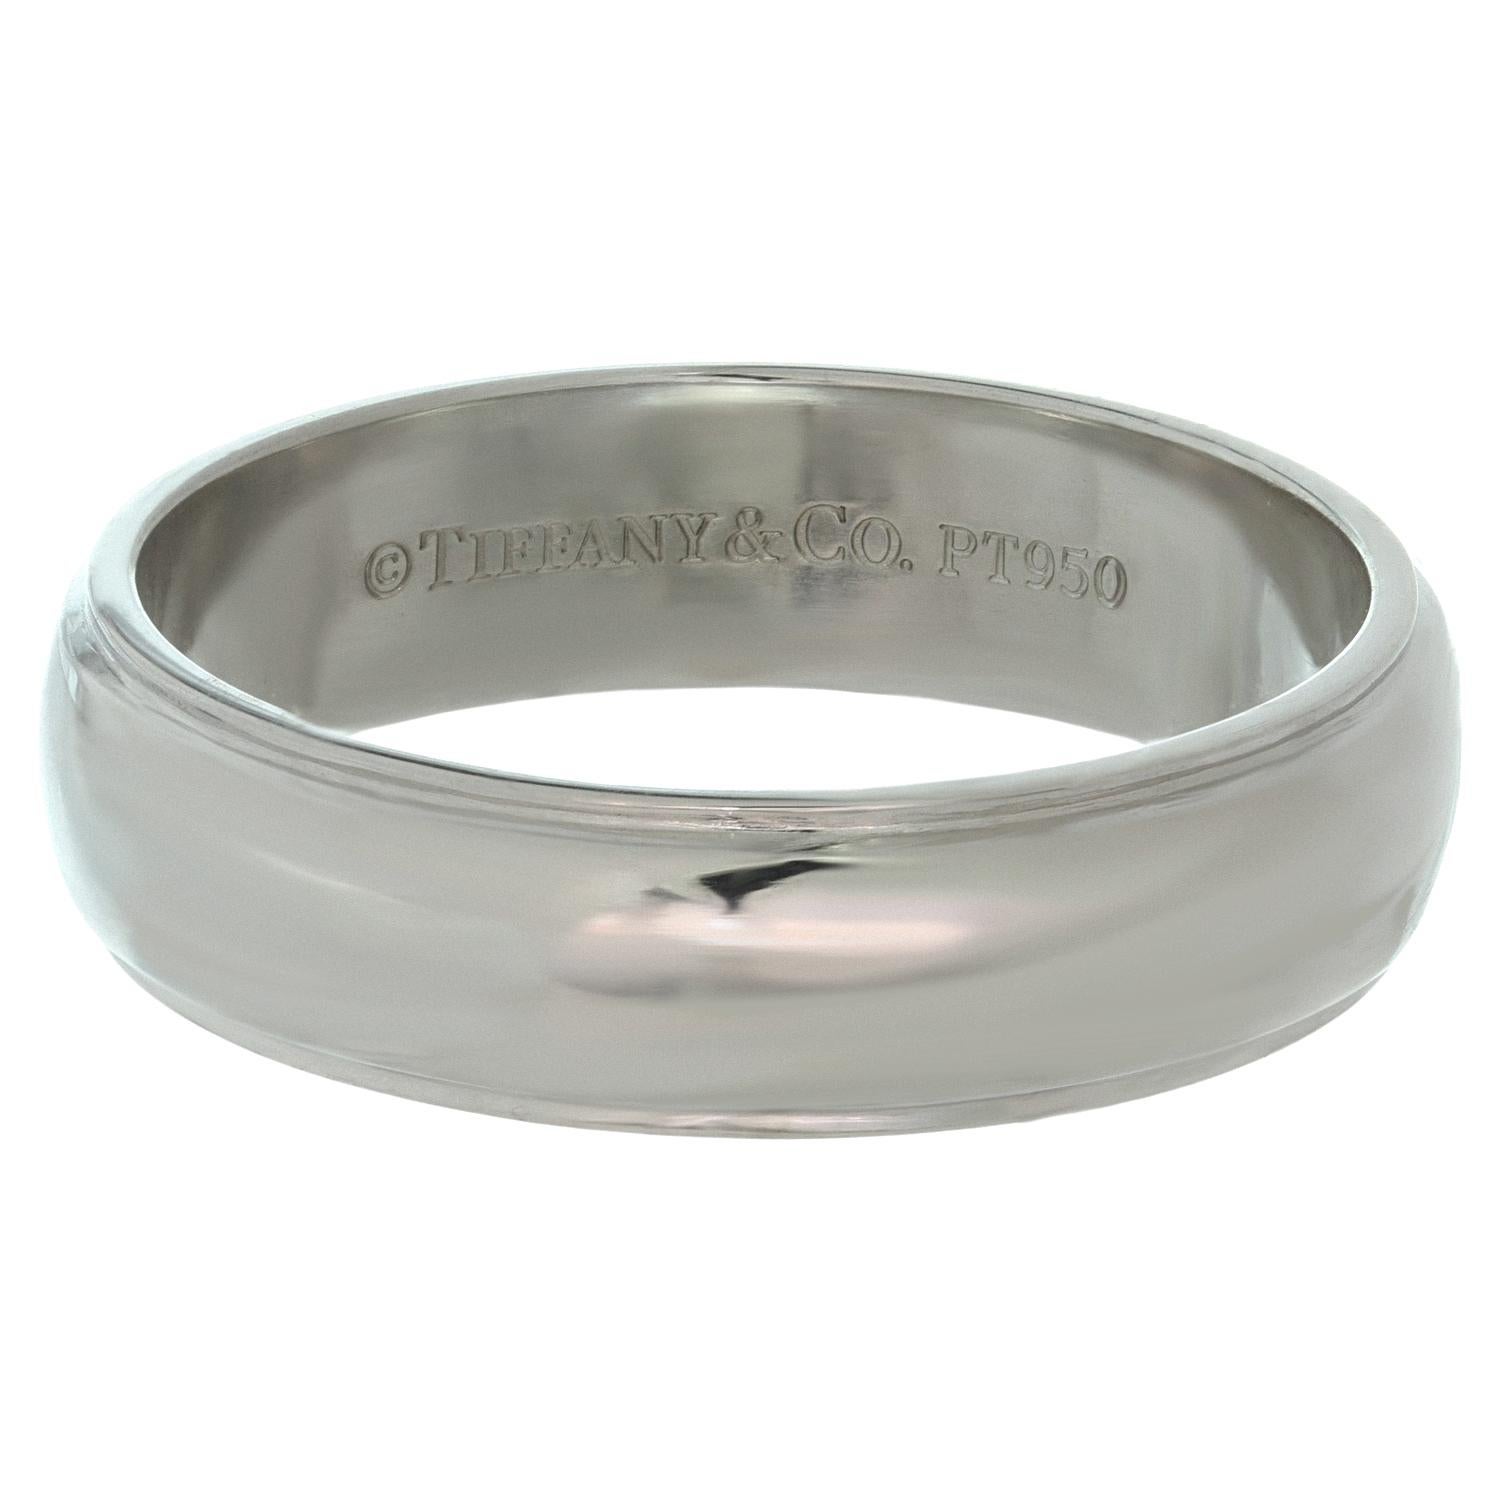 This classic Tiffany & Co. wedding band is crafted in 950 platinum and measures 6.0mm in width. Made in United States circa 2010s. Measurements: 0.23